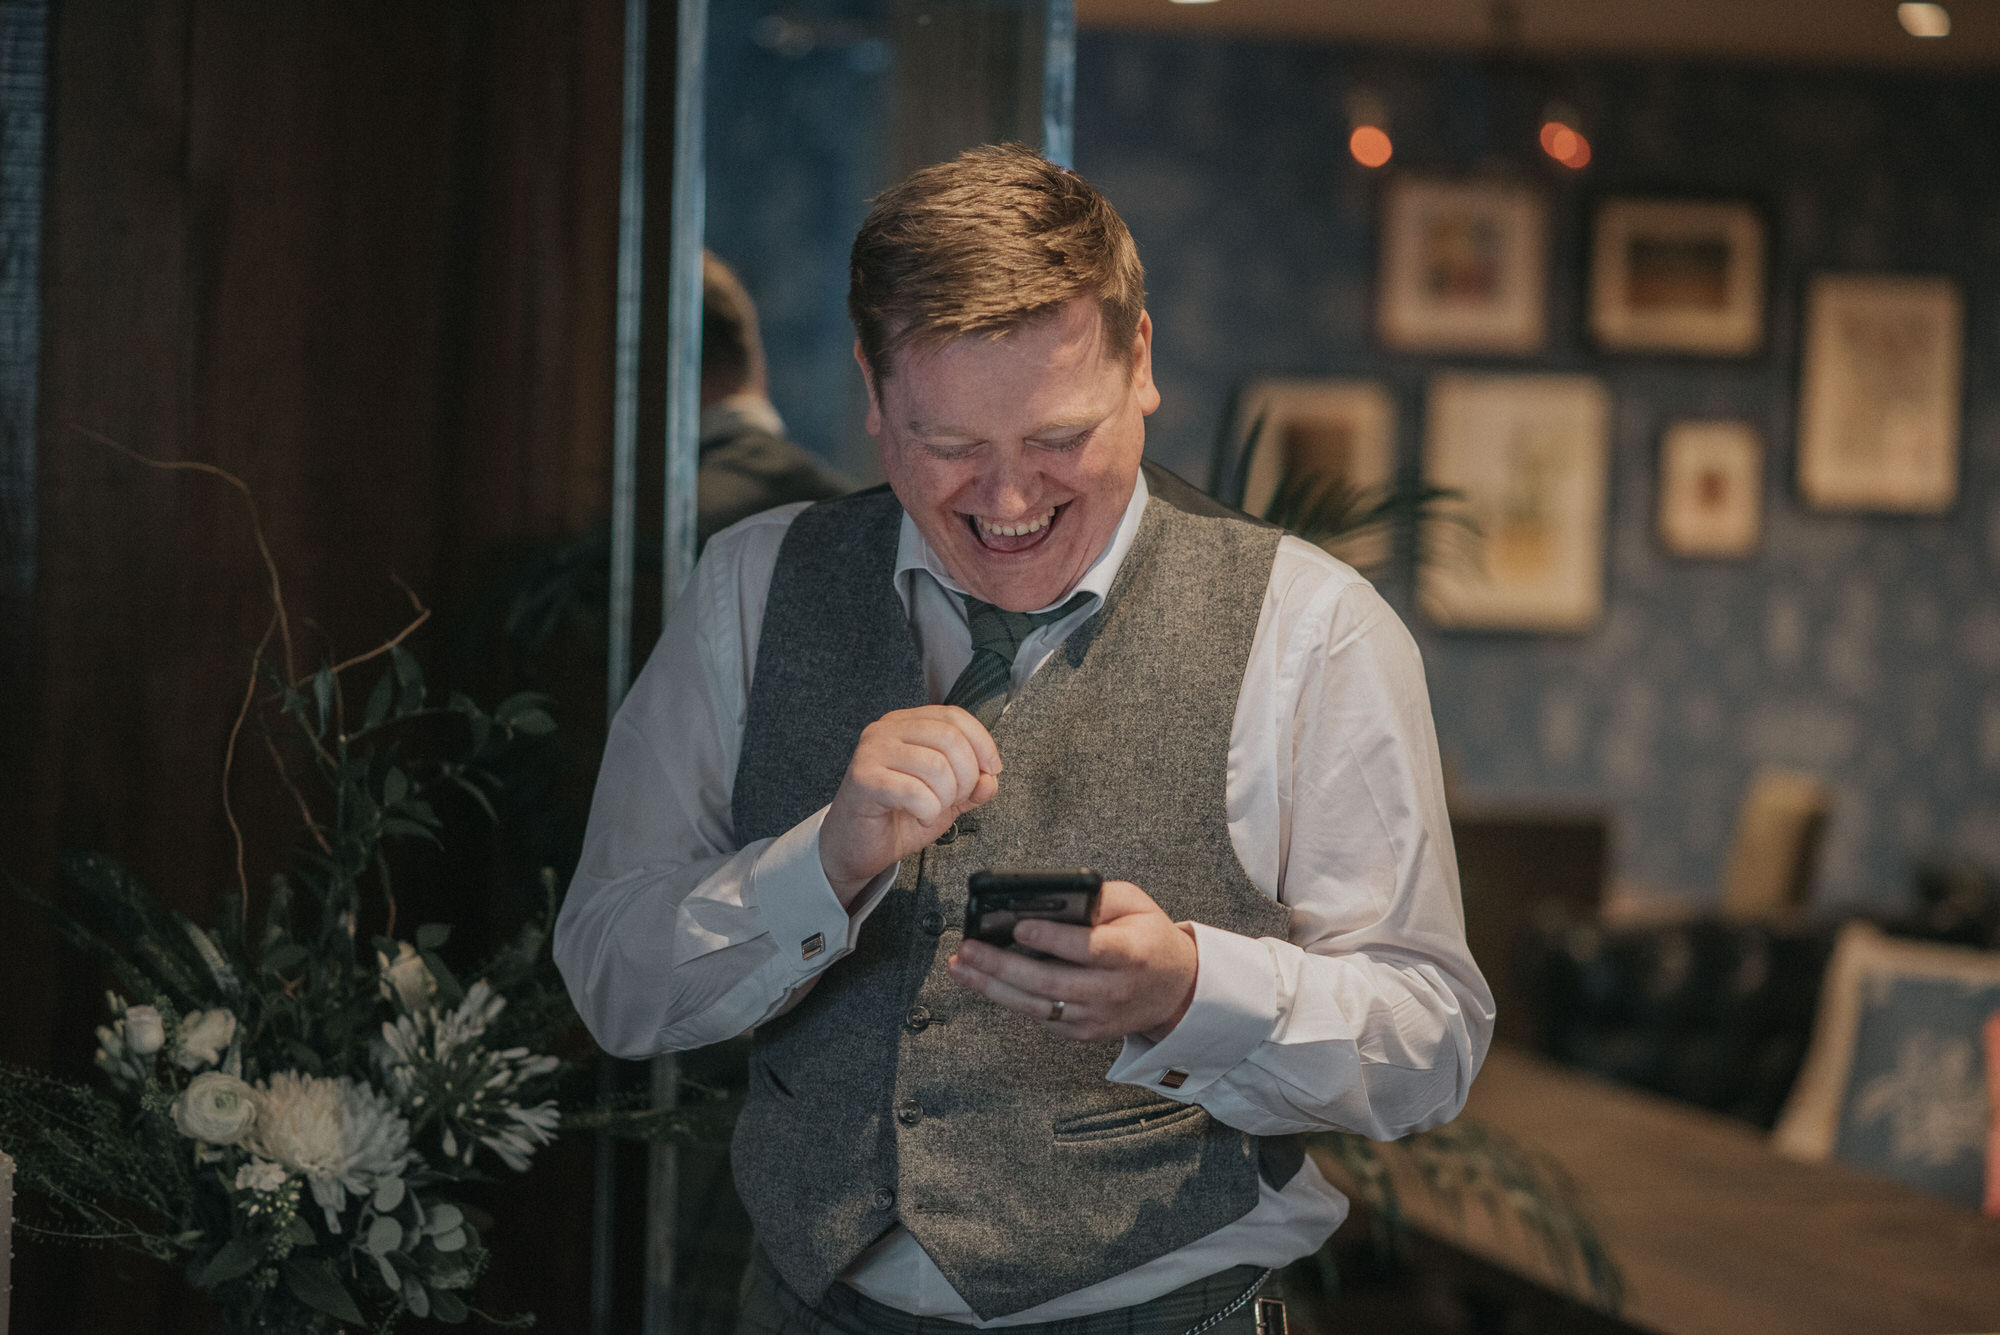 The best man laughs during his speech